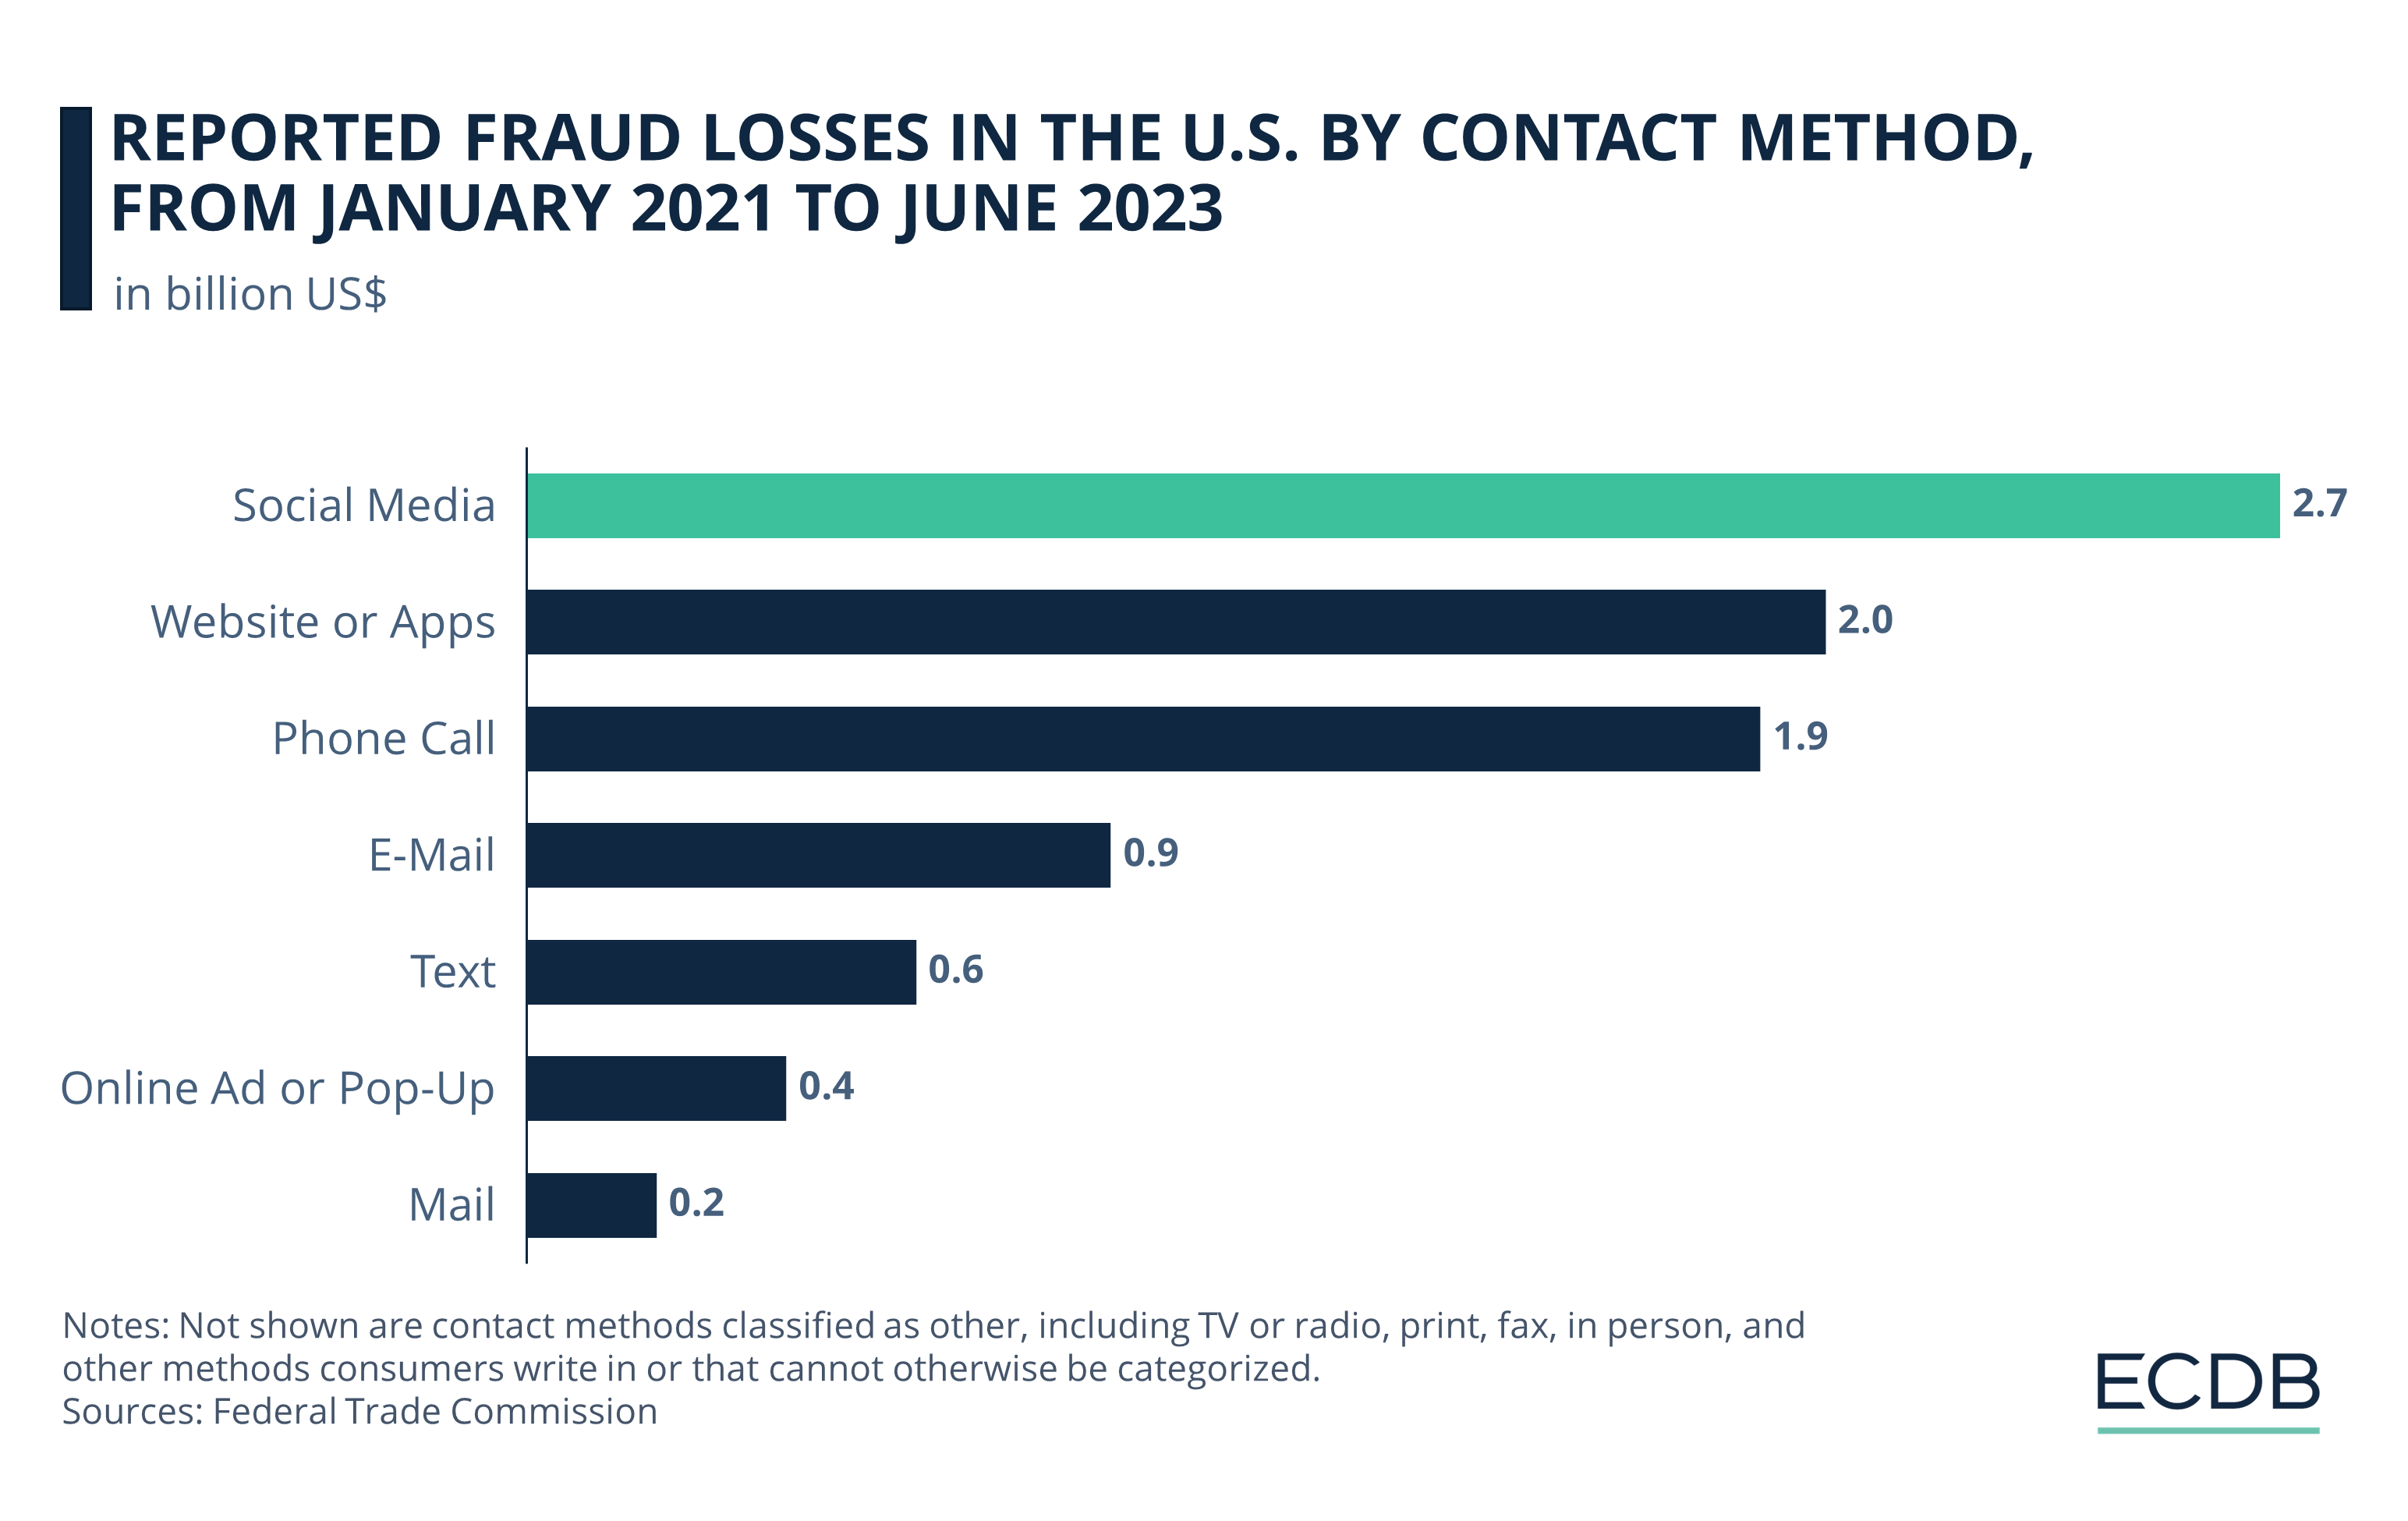 Reported Fraud Losses in the U.S. by Contact Method, 2021-2023